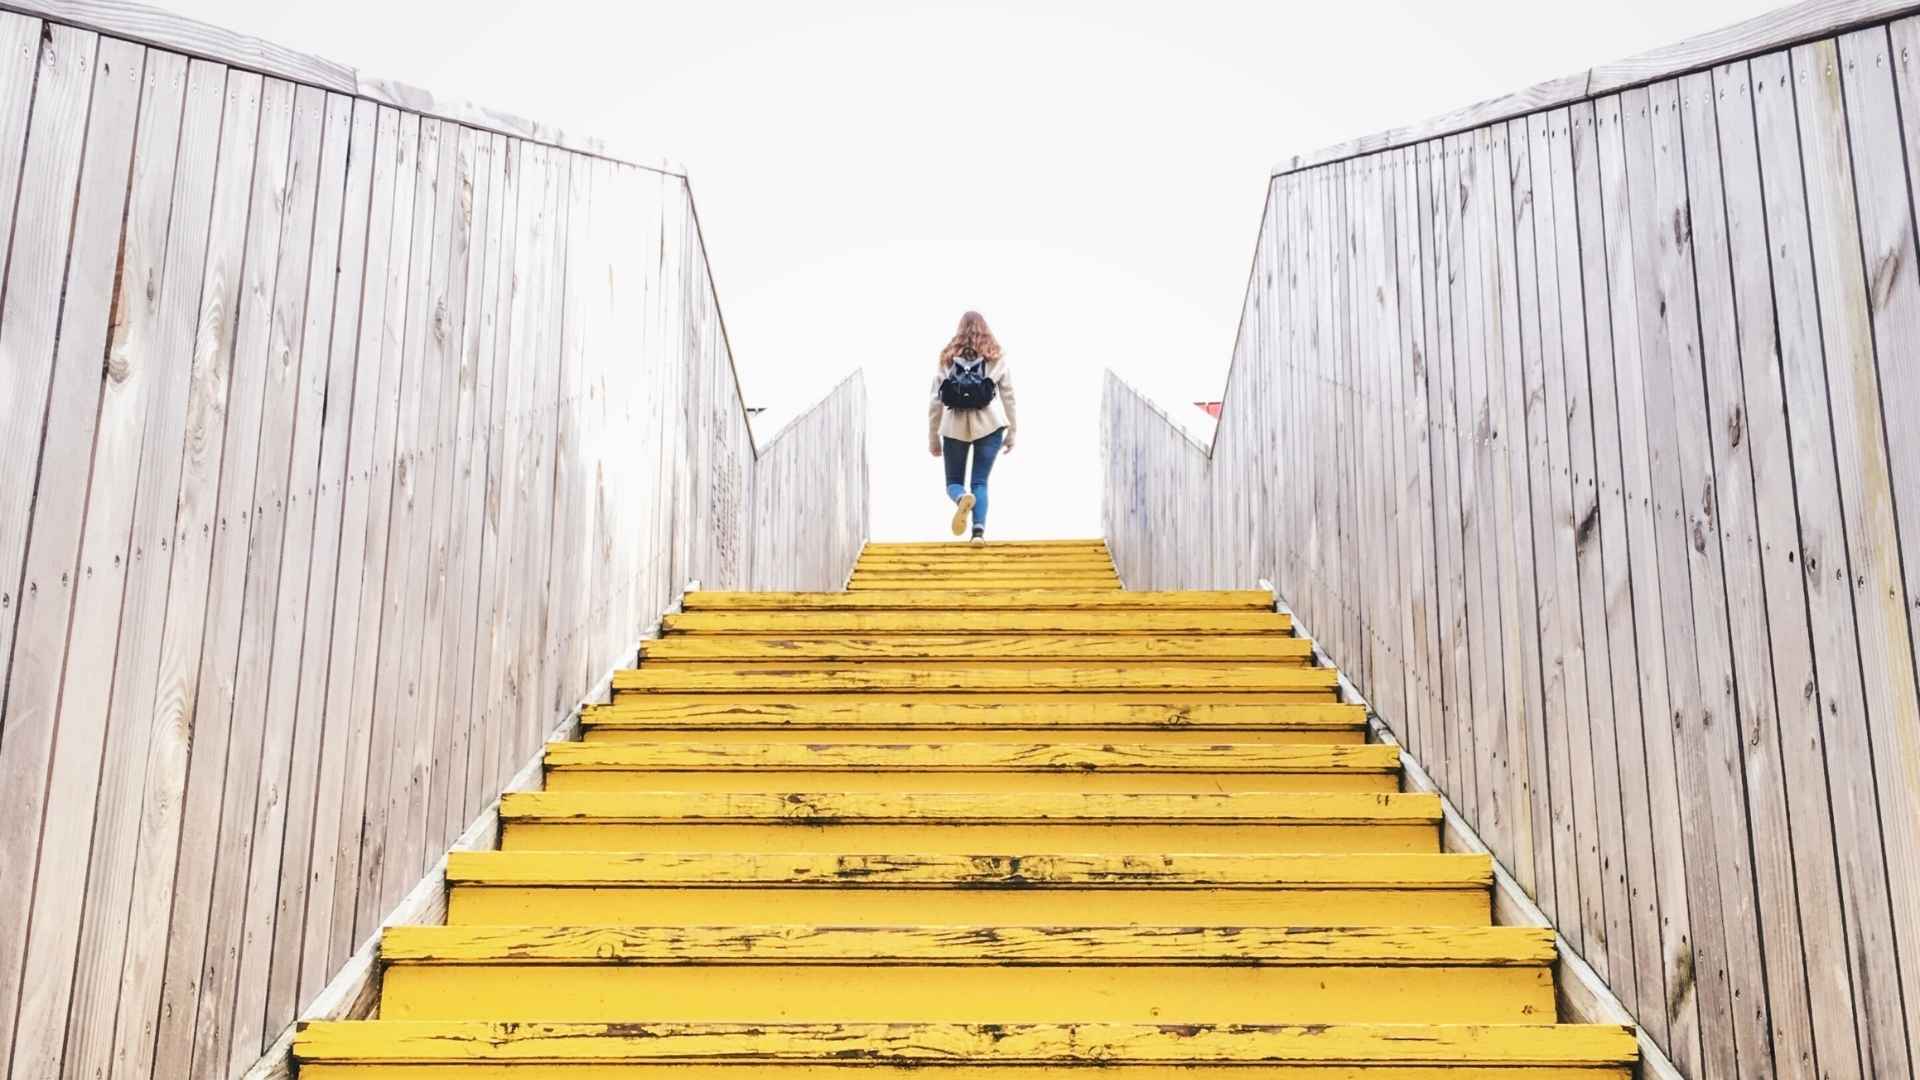 an image of a person climbing stairs